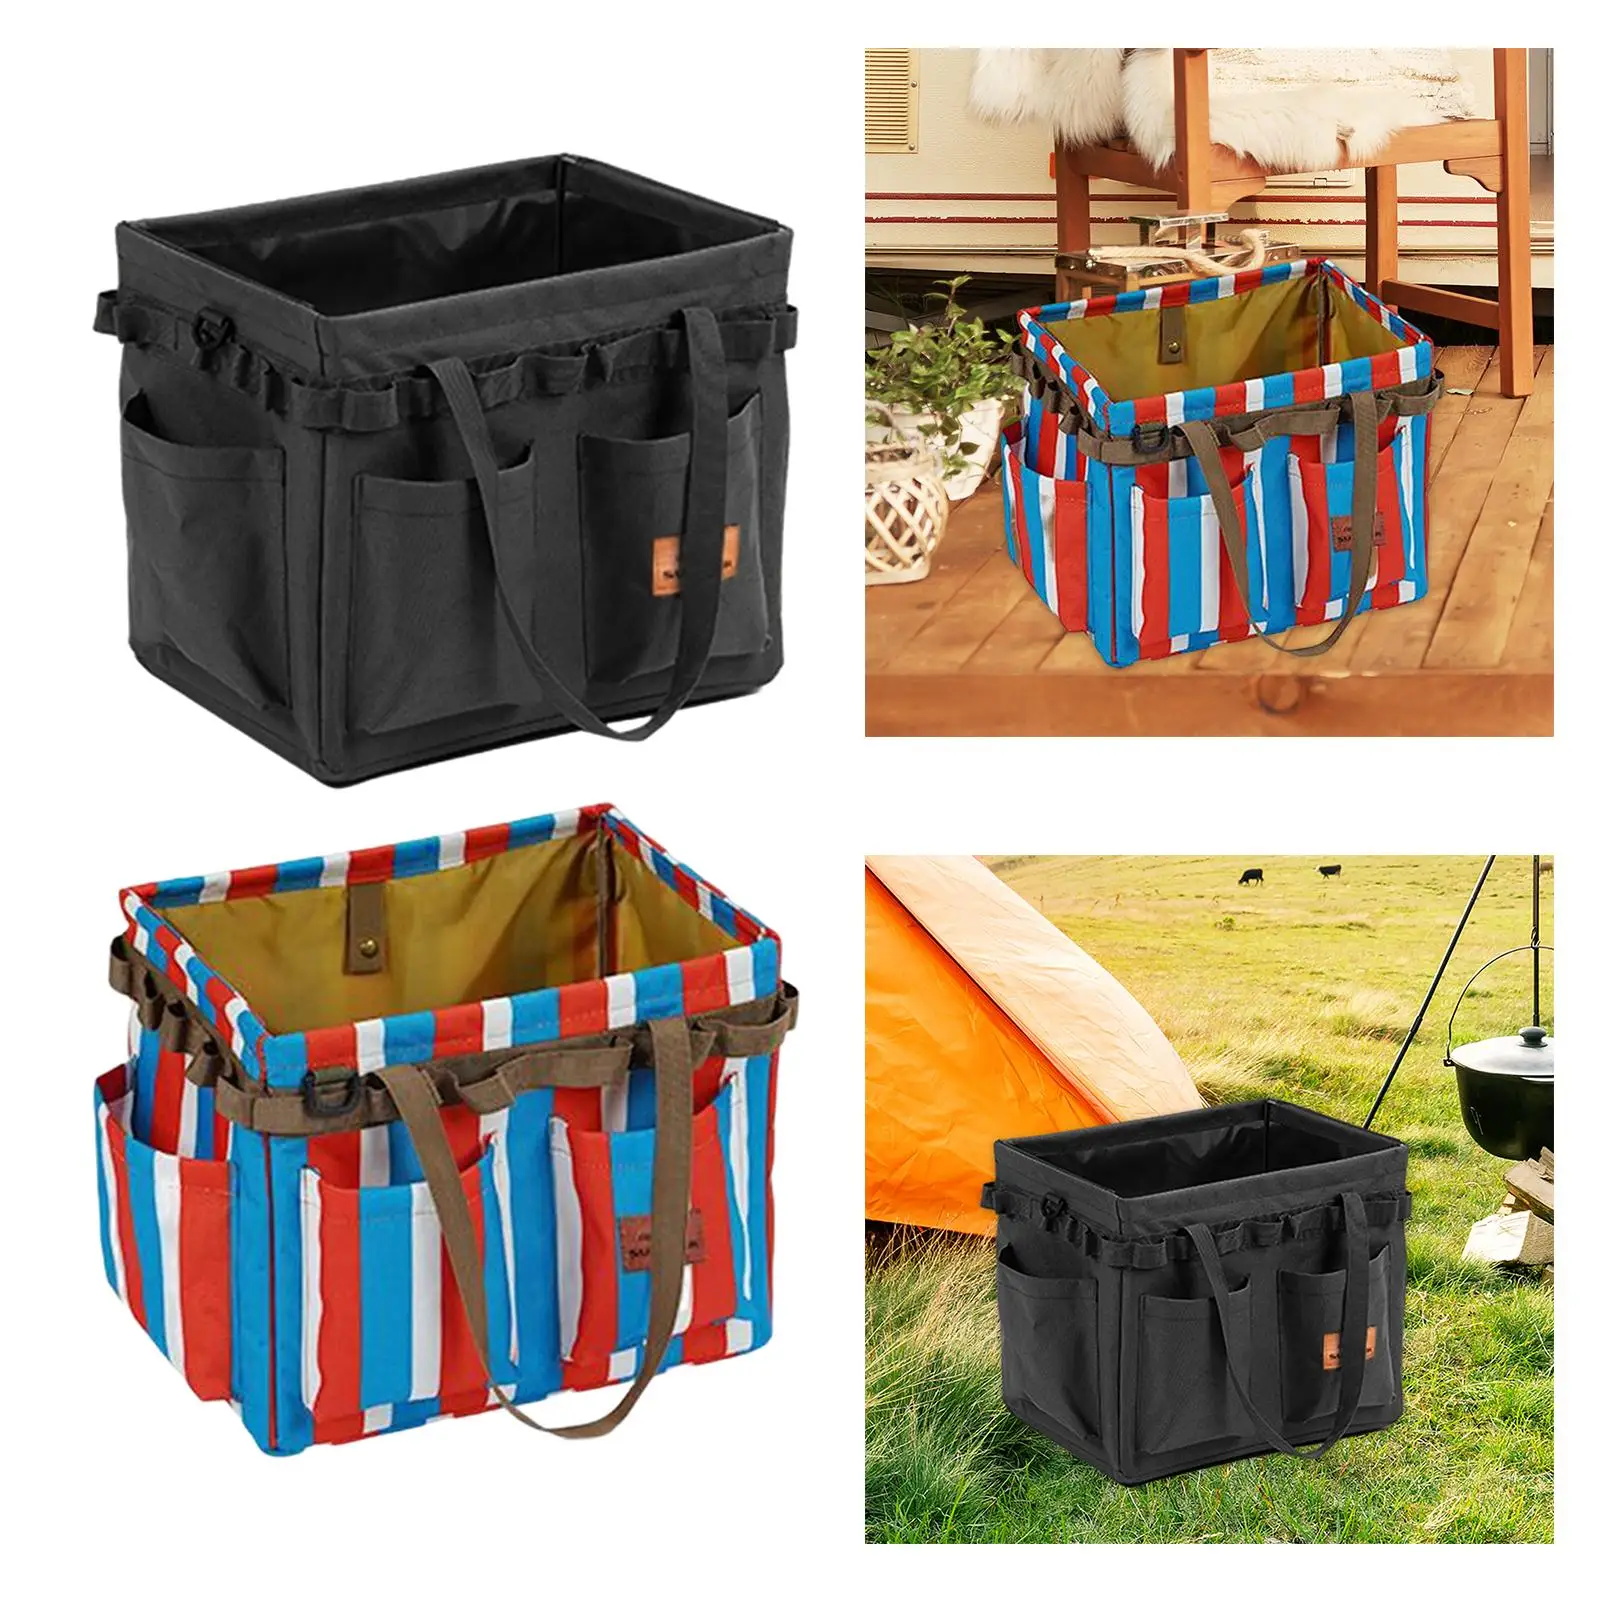 Foldable Camping Storage Bag Tool Organizer with Carry Handles Utility Tote for Groceries